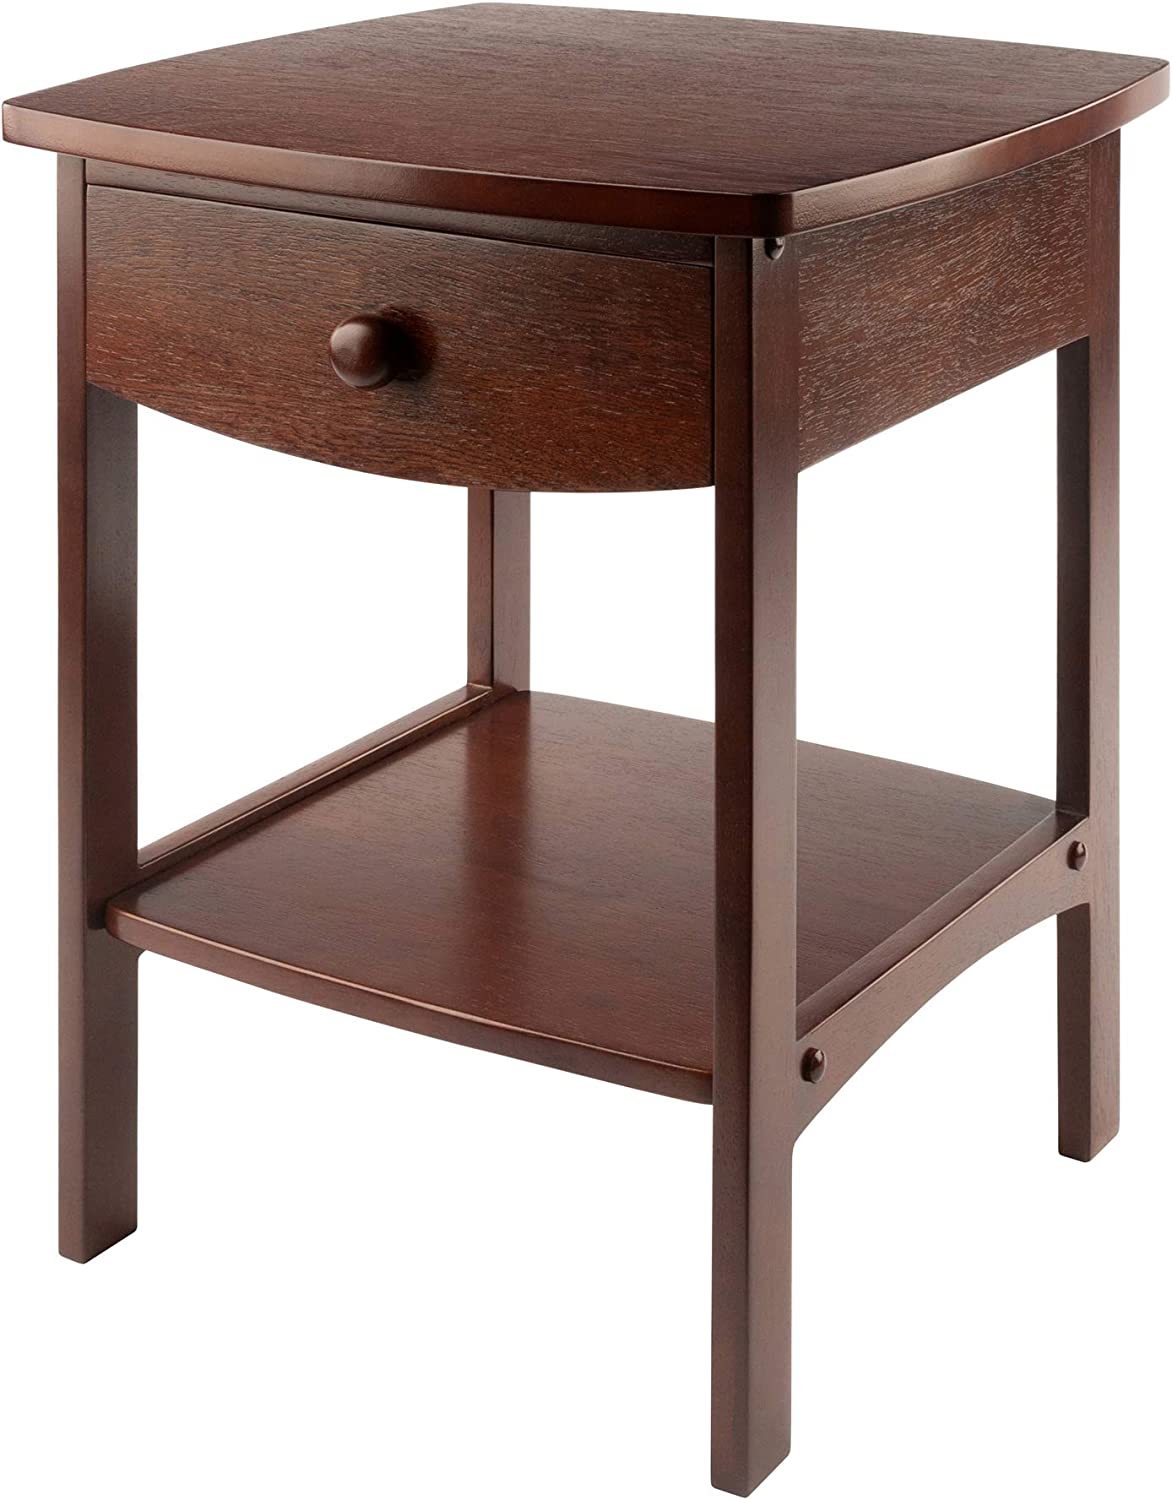 Walnut Winsome Wood Claire Accent Table - $64.92